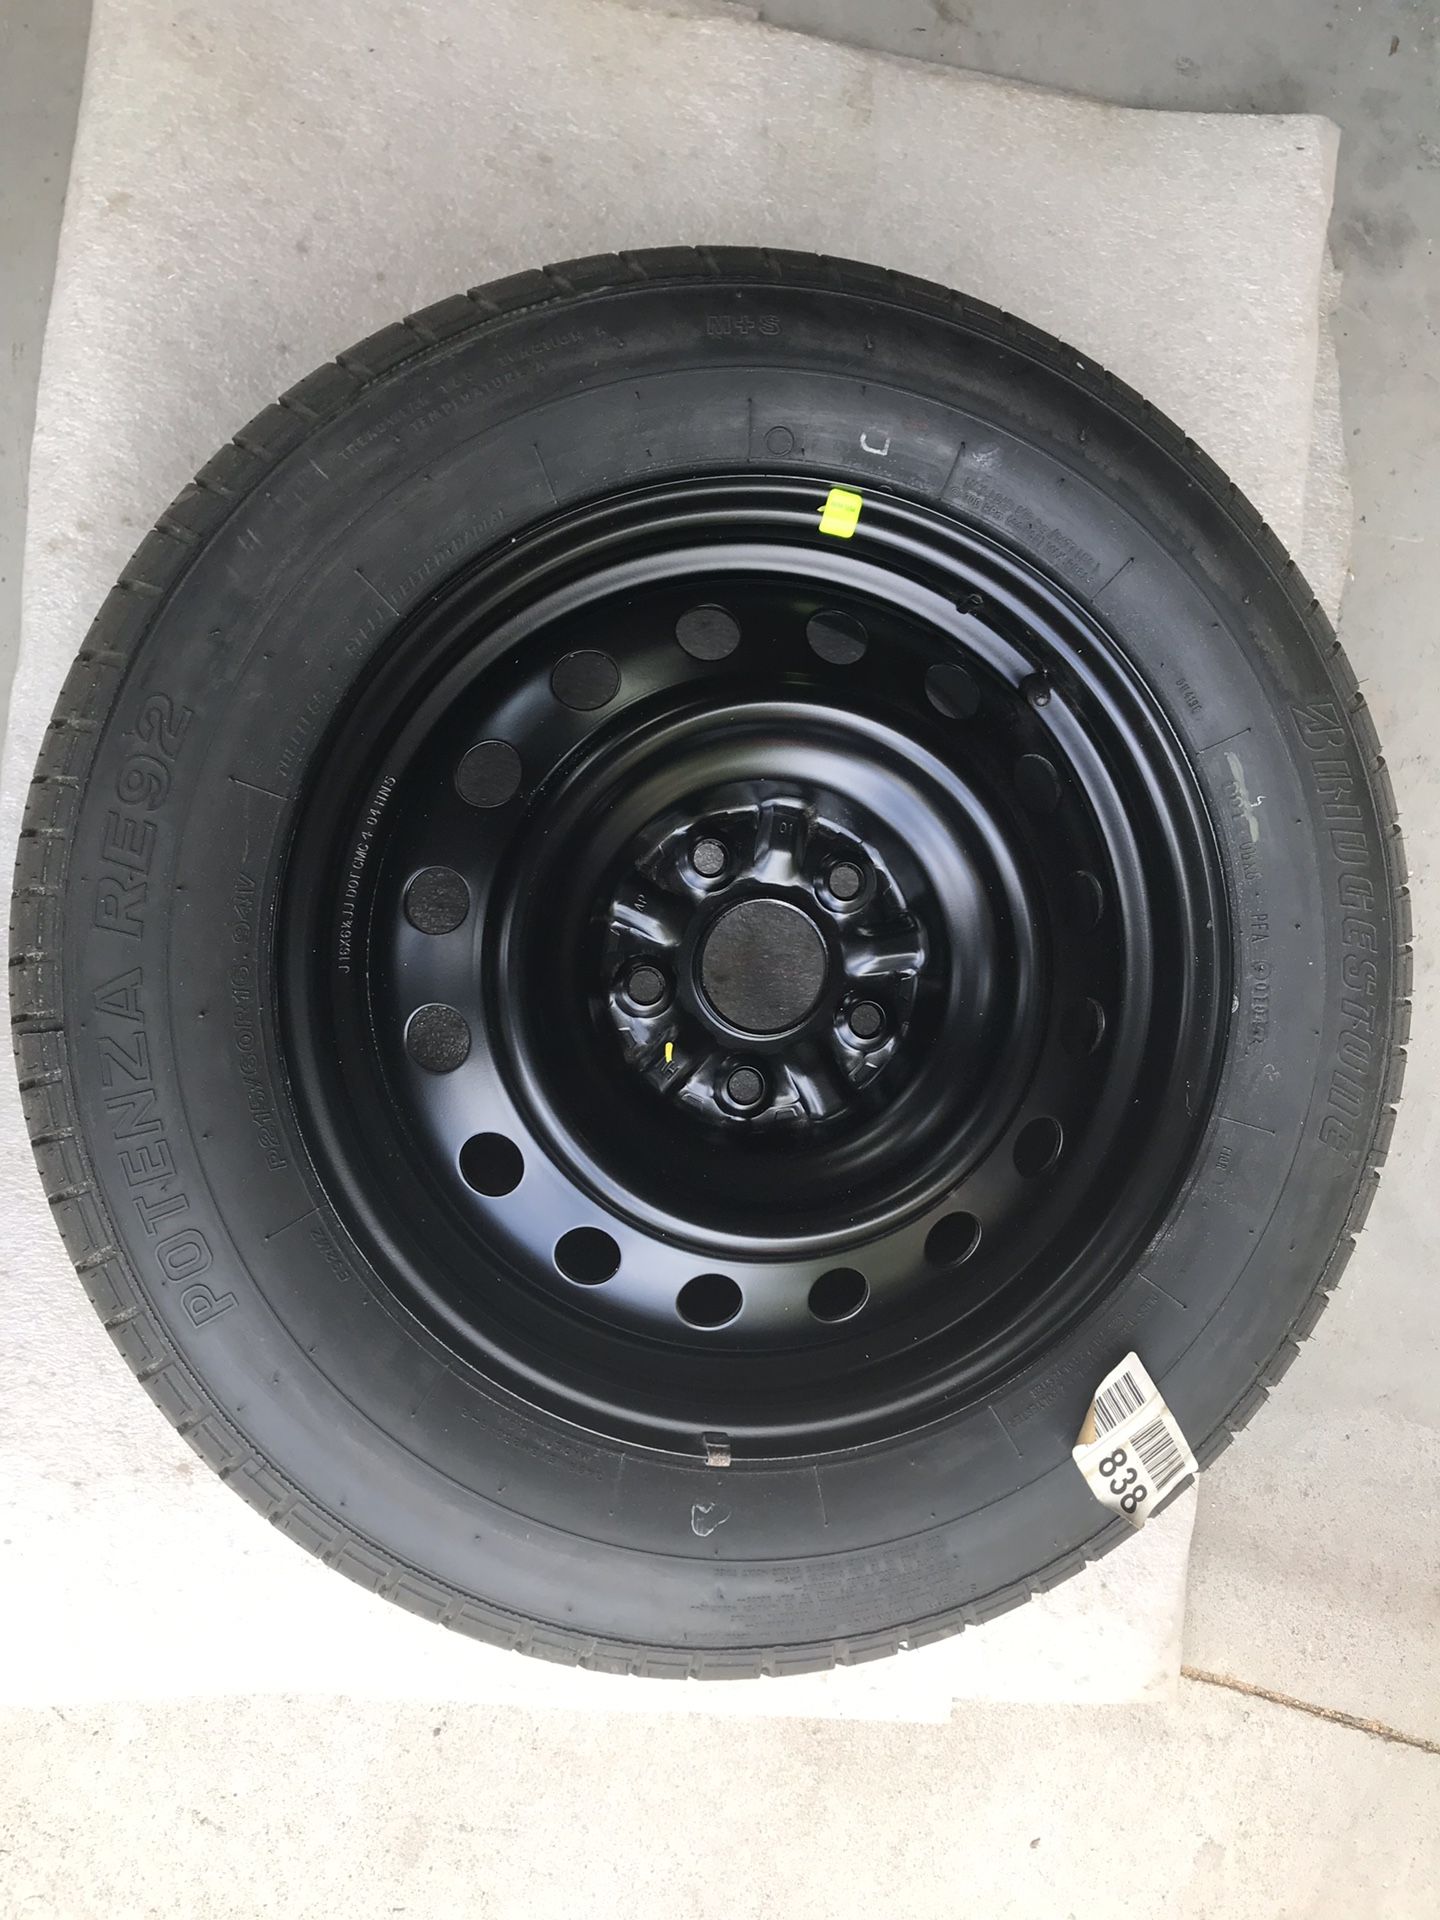 Brand new spare (1) Toyota Camry steel wheel and tire 215 60 16